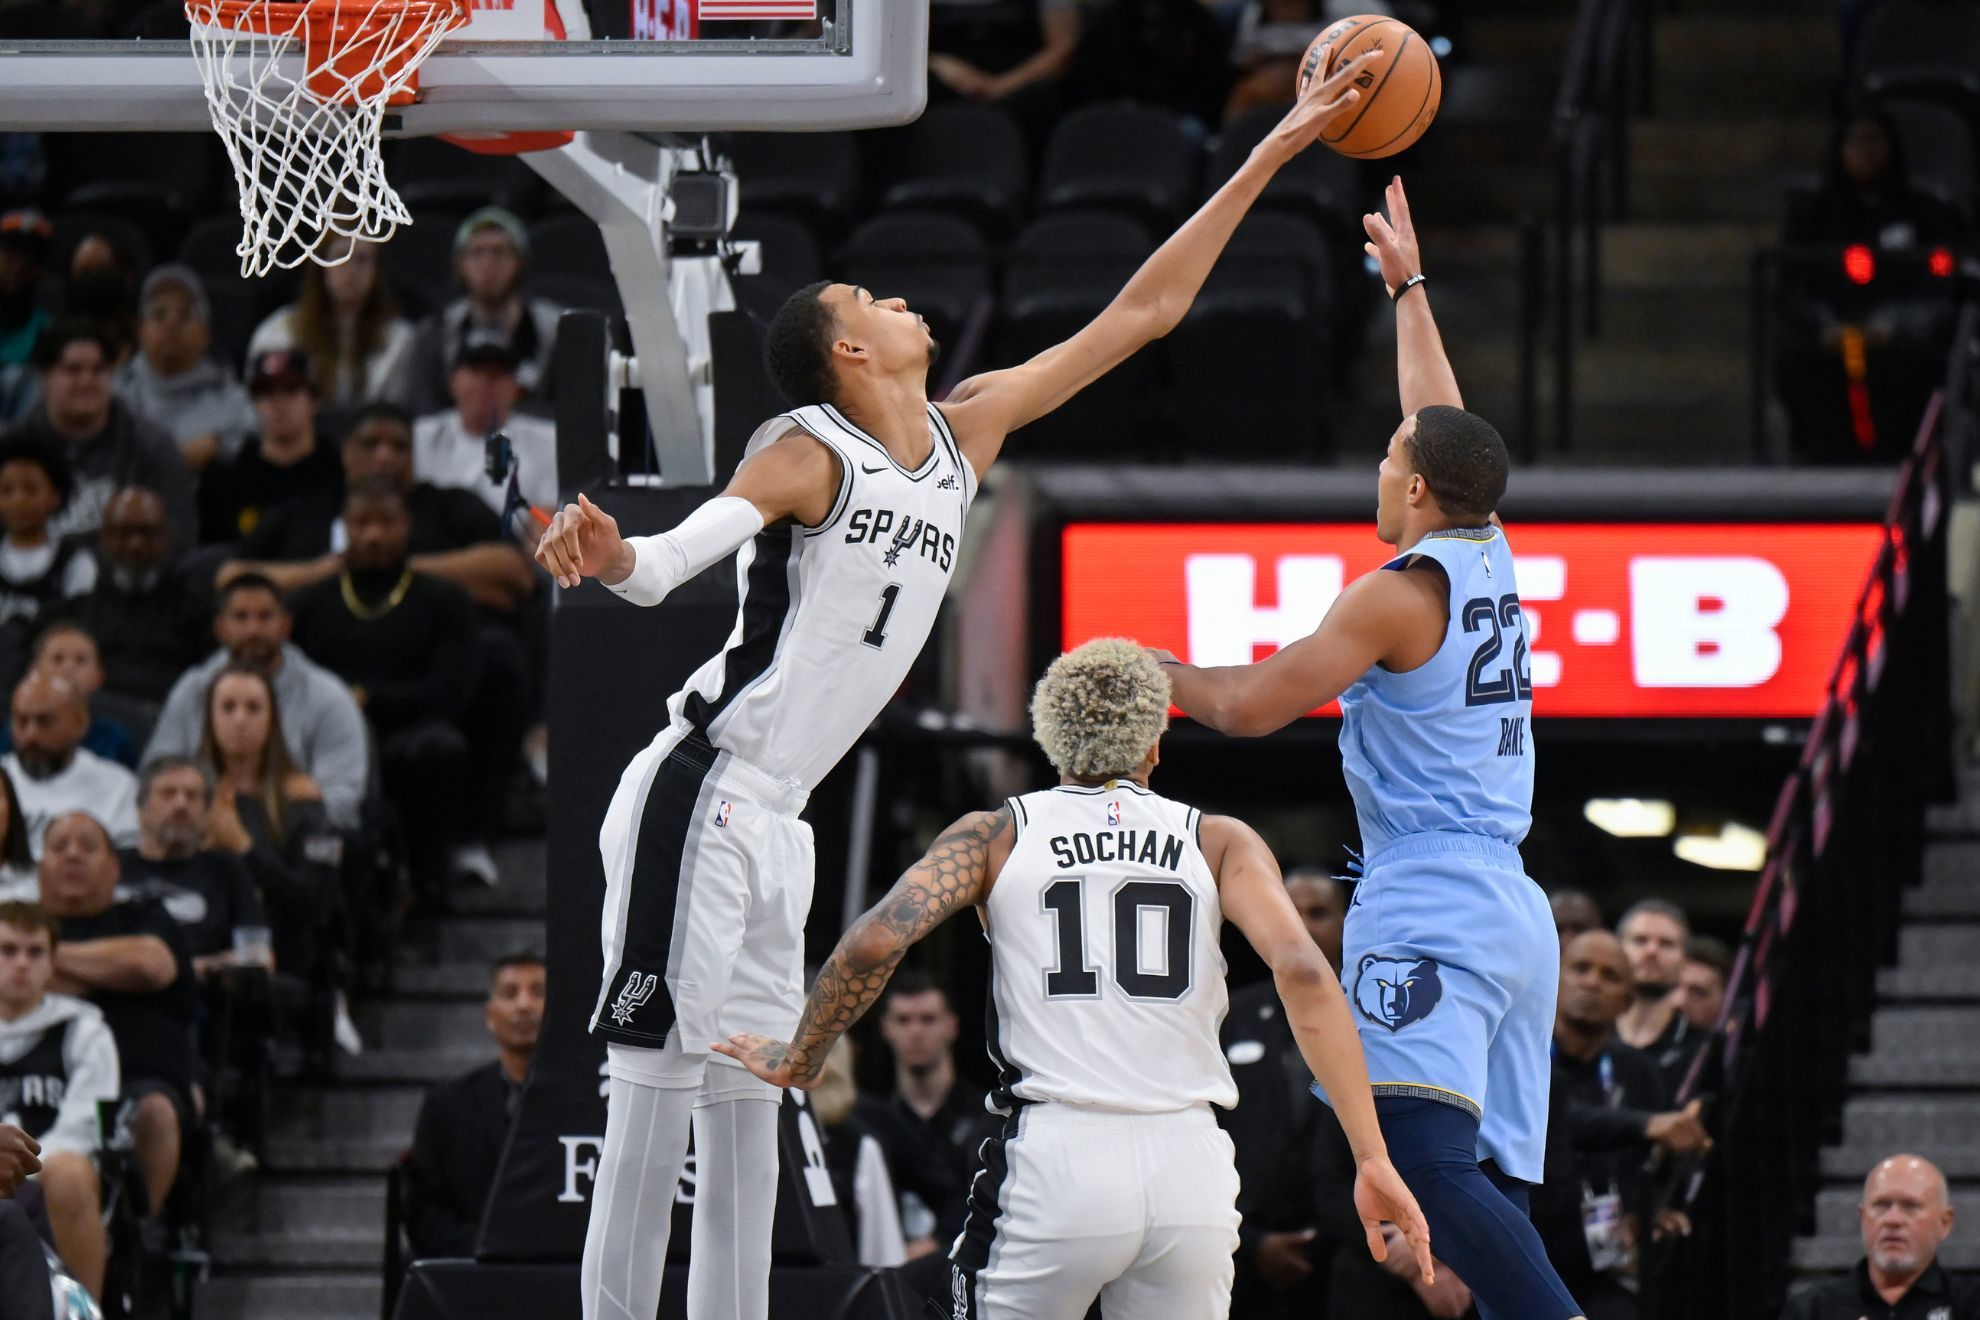 Wemby's double-double not enough for Spurs to overcome Grizzlies, avoid 8-game skid